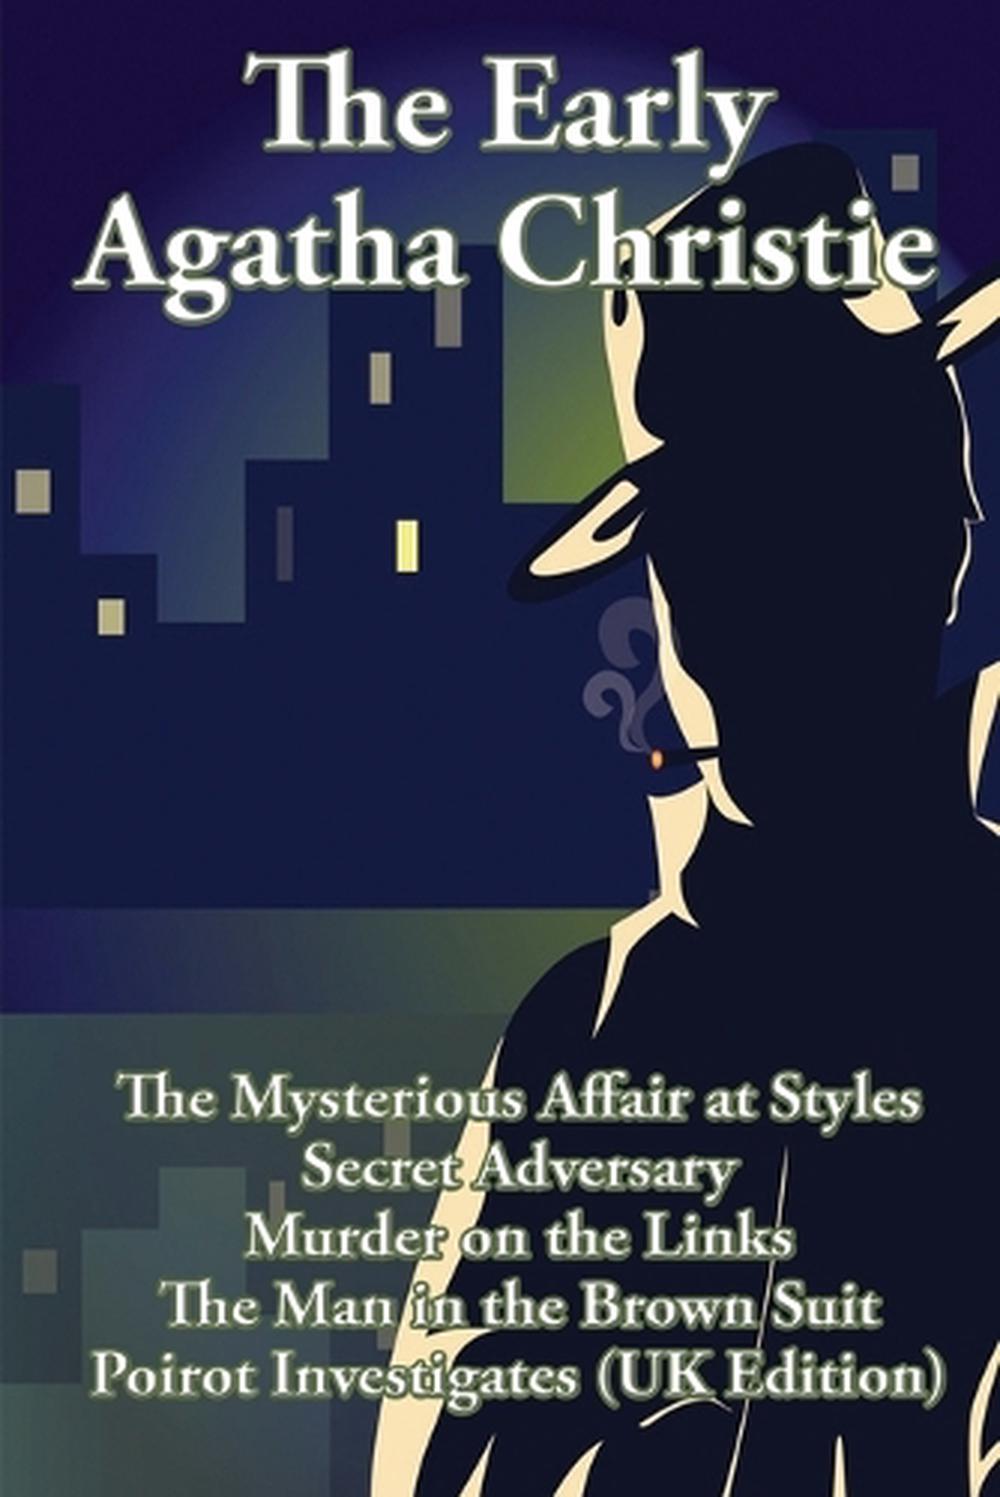 the christie affair release date